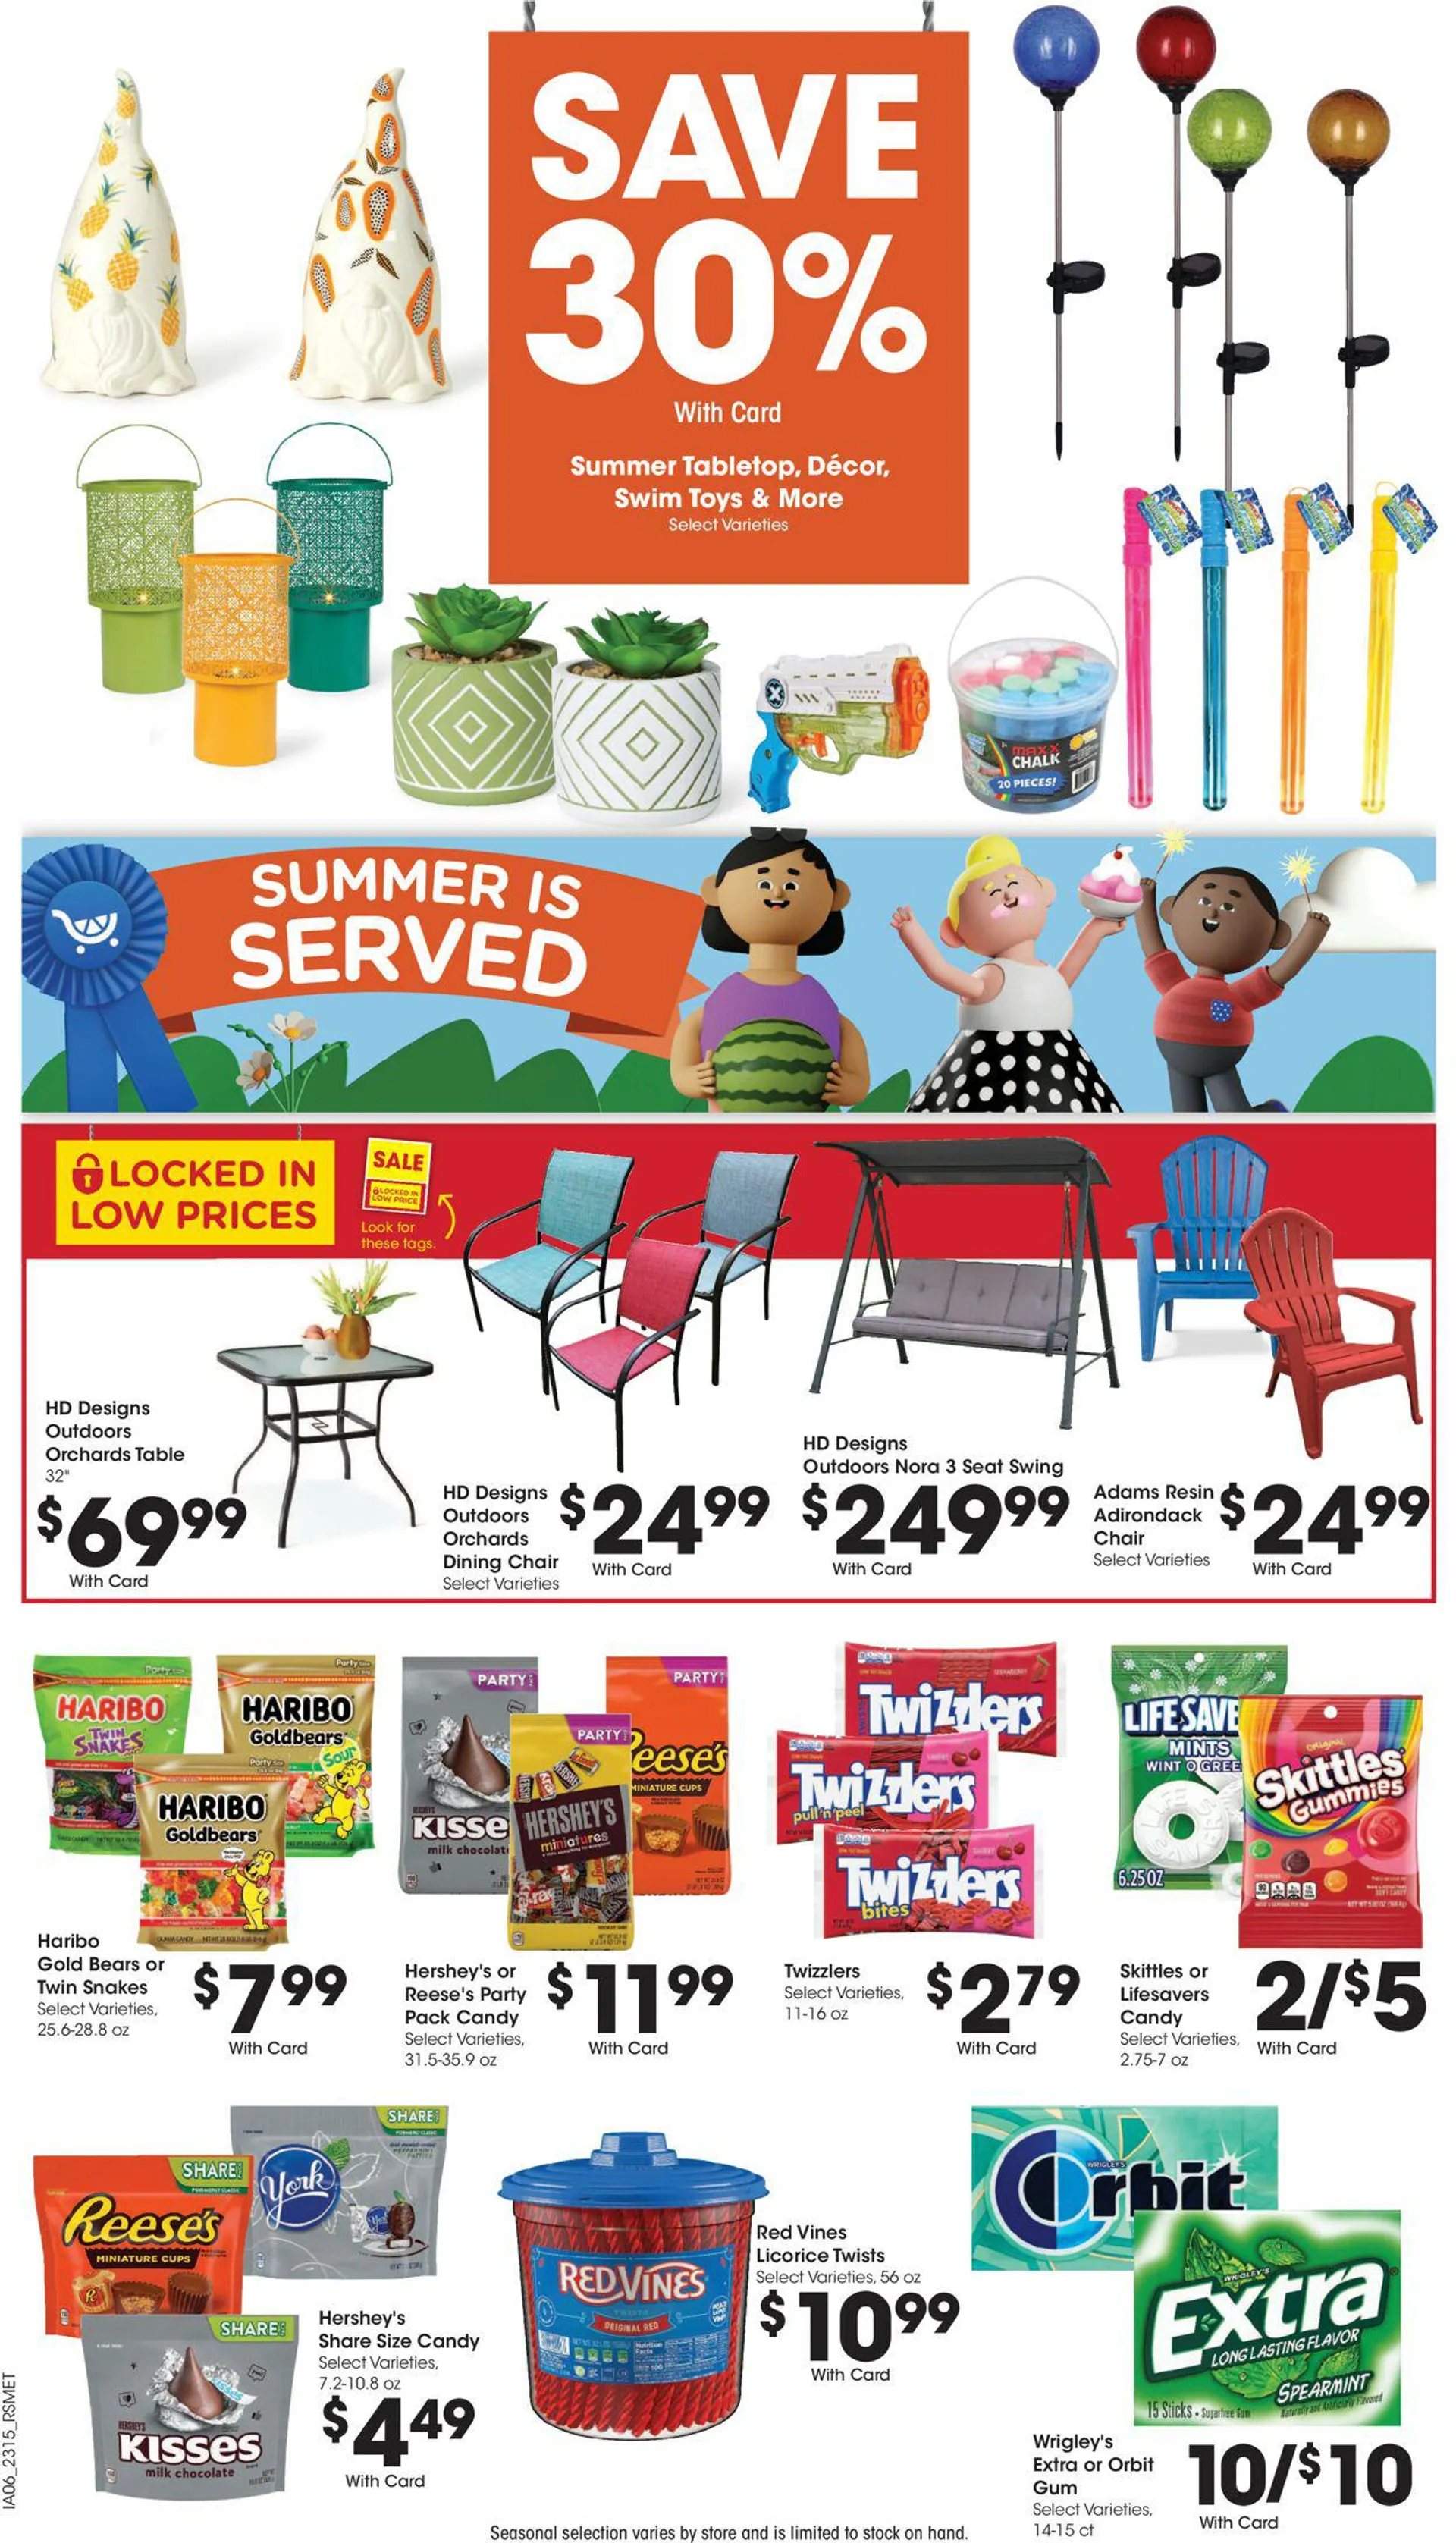 Pick ‘n Save Current weekly ad - 13